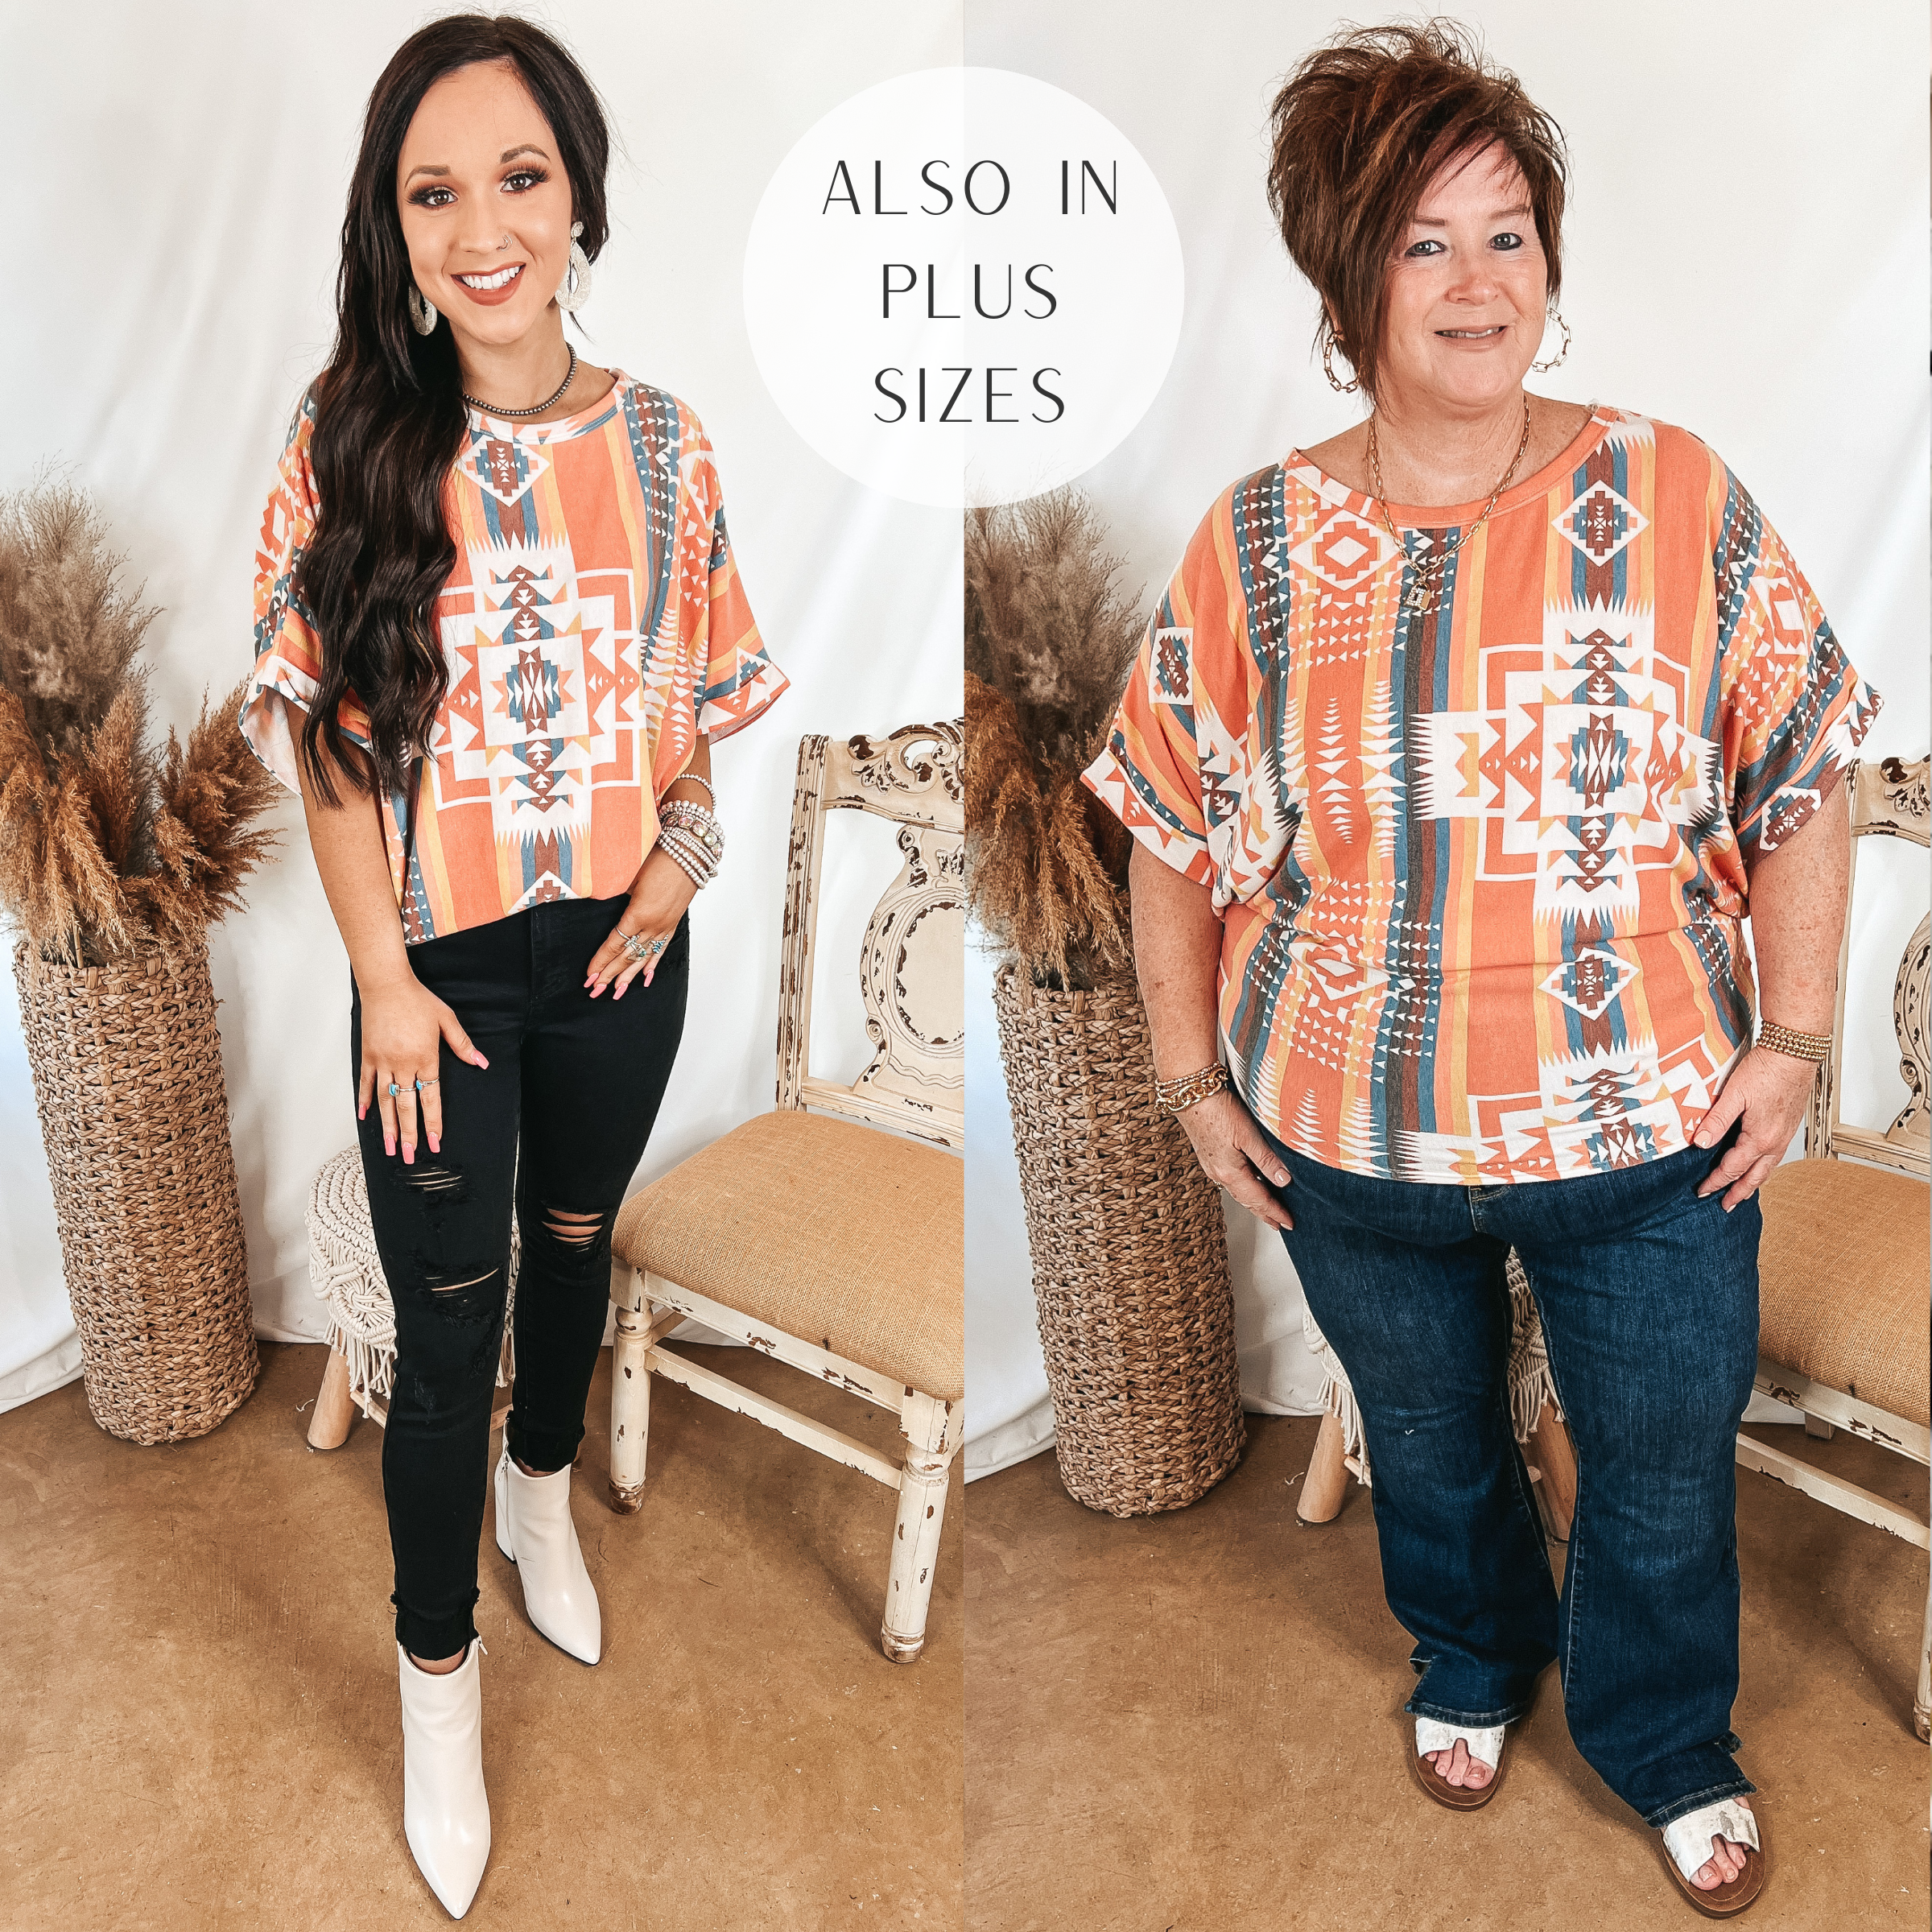 Models are wearing a stripe and Aztec drop sleeve top in coral, yellow and blue. Size small model has it paired with black distressed jeans and white booties. Plus size model has it paired with dark wash boyfriend jeans, white sandals, and gold jewelry.